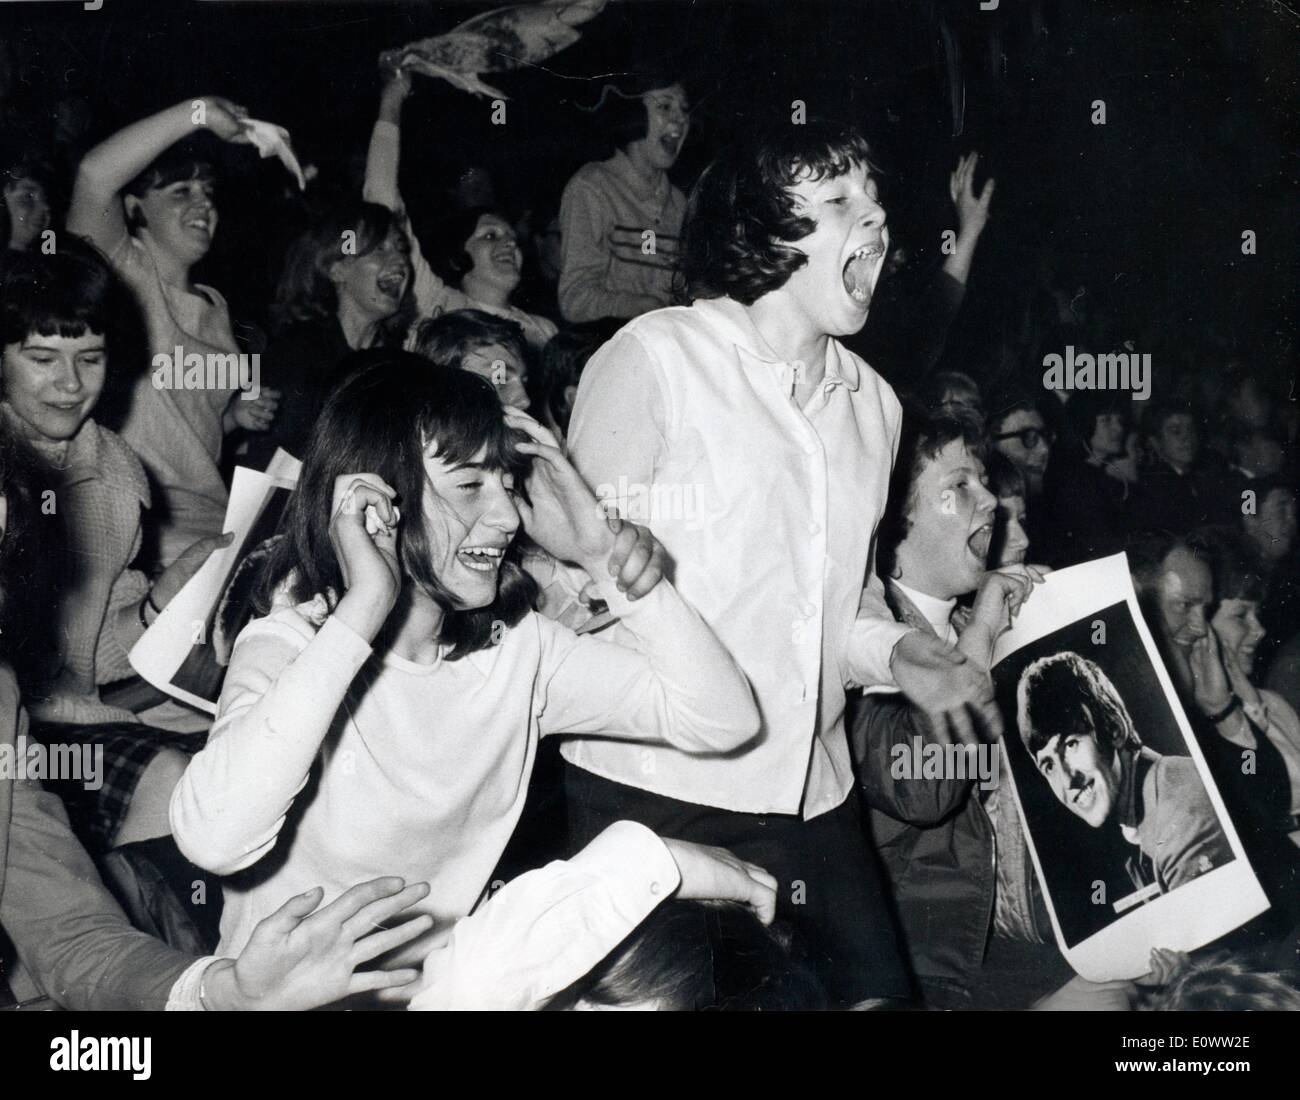 The Beatles fans go crazy at the Empire Pool Stock Photo